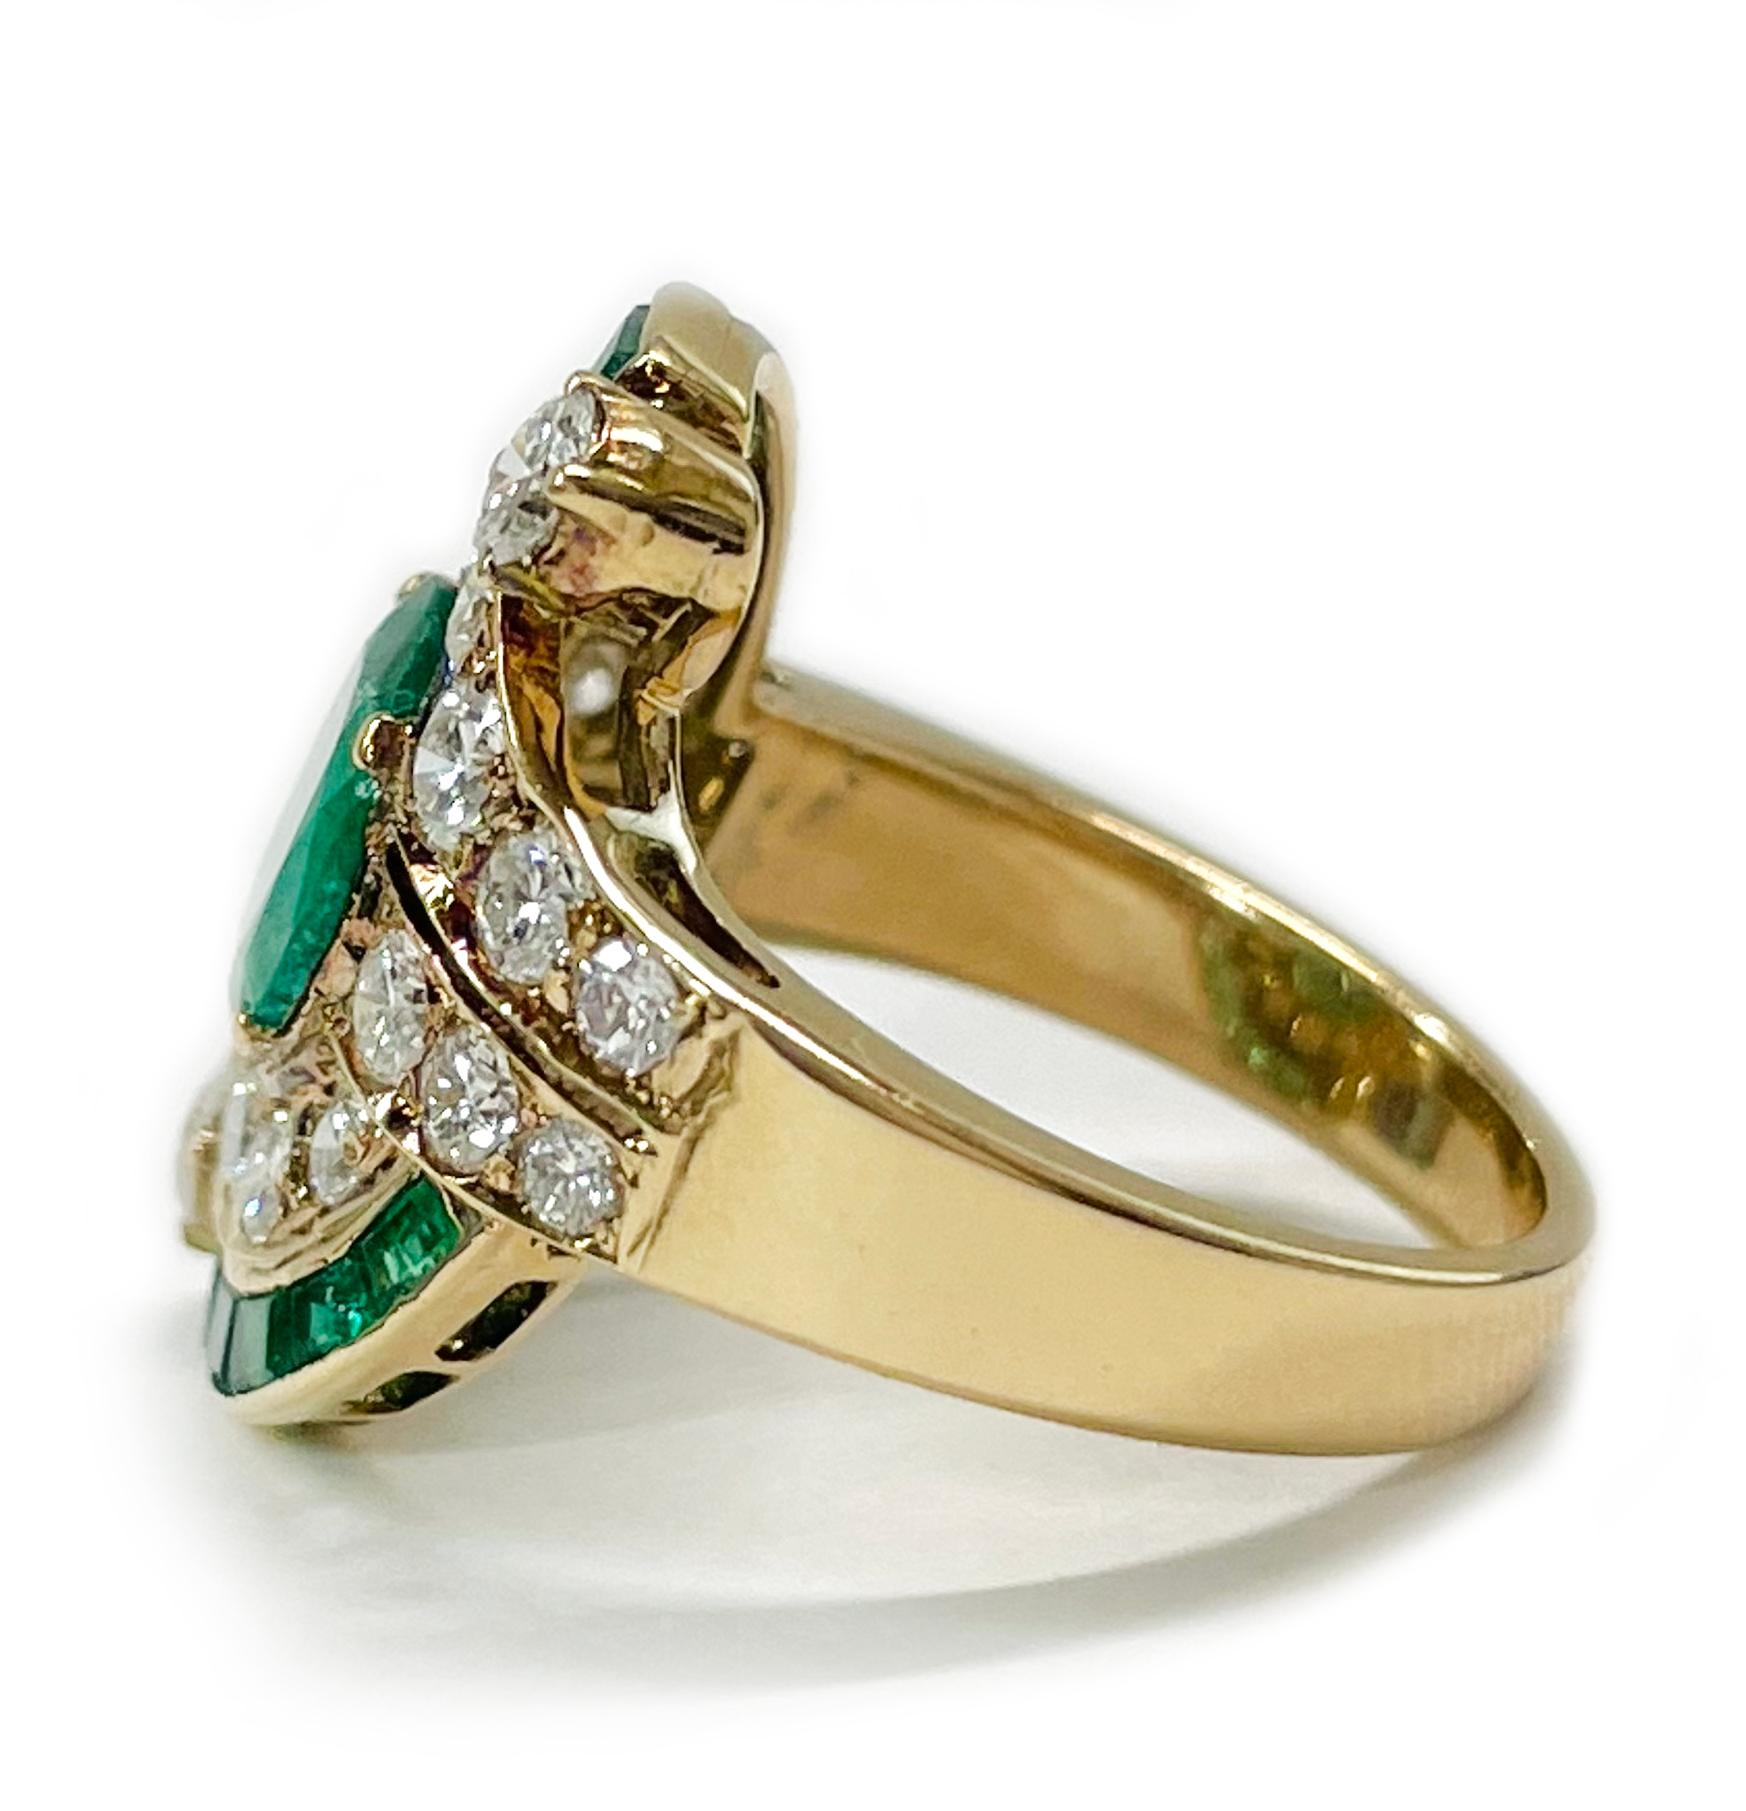 Yellow Gold Emerald Diamond Ring. The lovely ring features a center oval emerald with round diamonds surrounding the emerald two arches of channel set princess cut emeralds and a round diamonds at the end. The center emerald measures 9 x 7mm and has